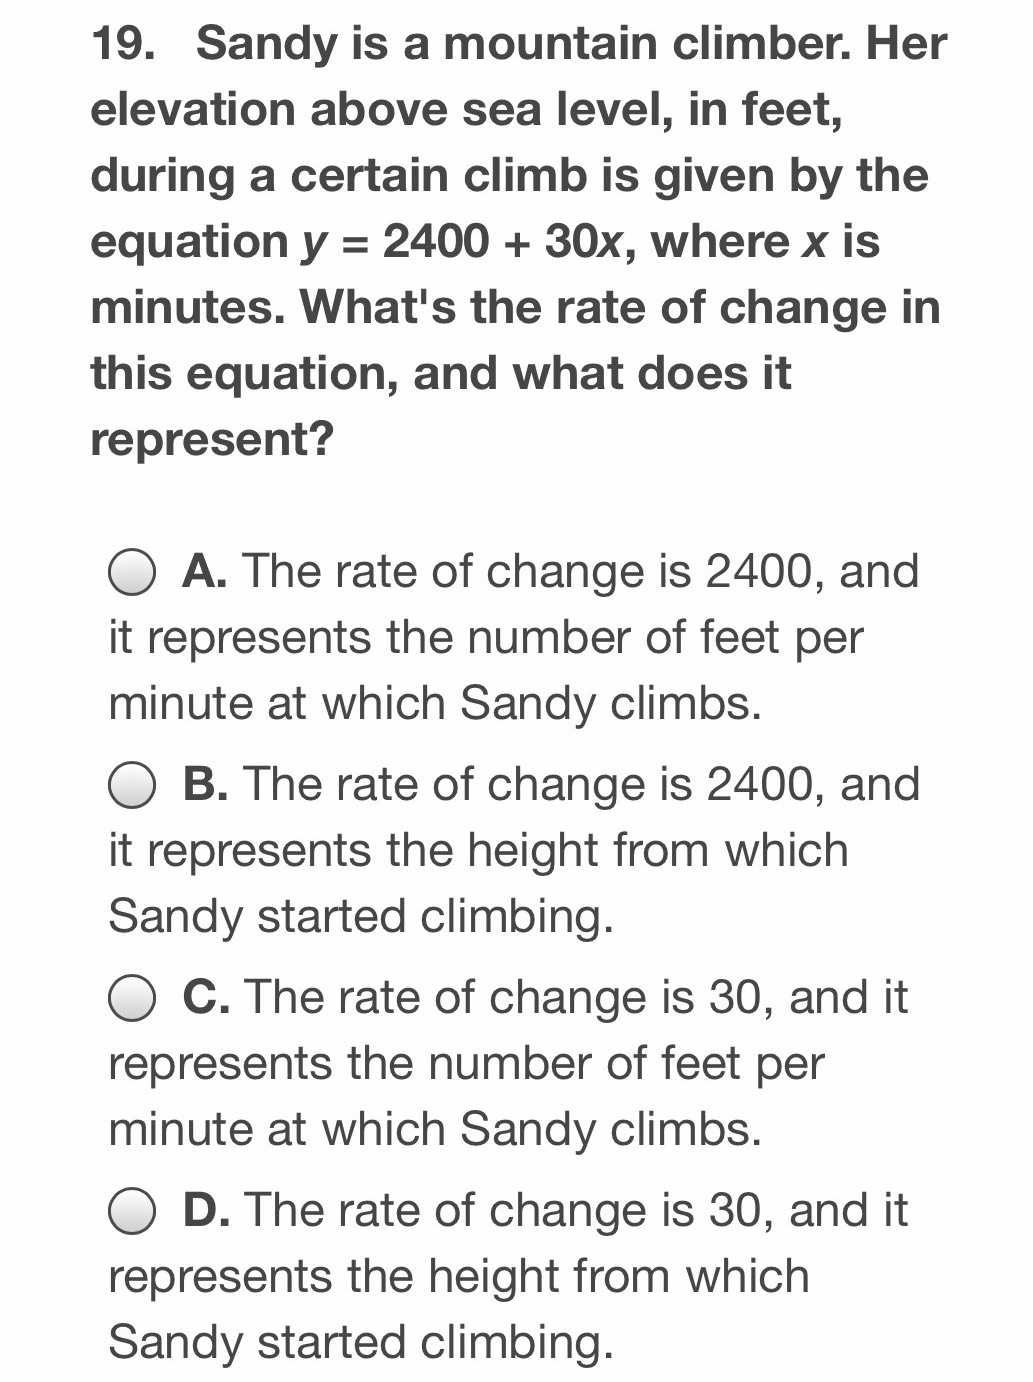 19. Sandy is a mountain climber. Her elevation abo...